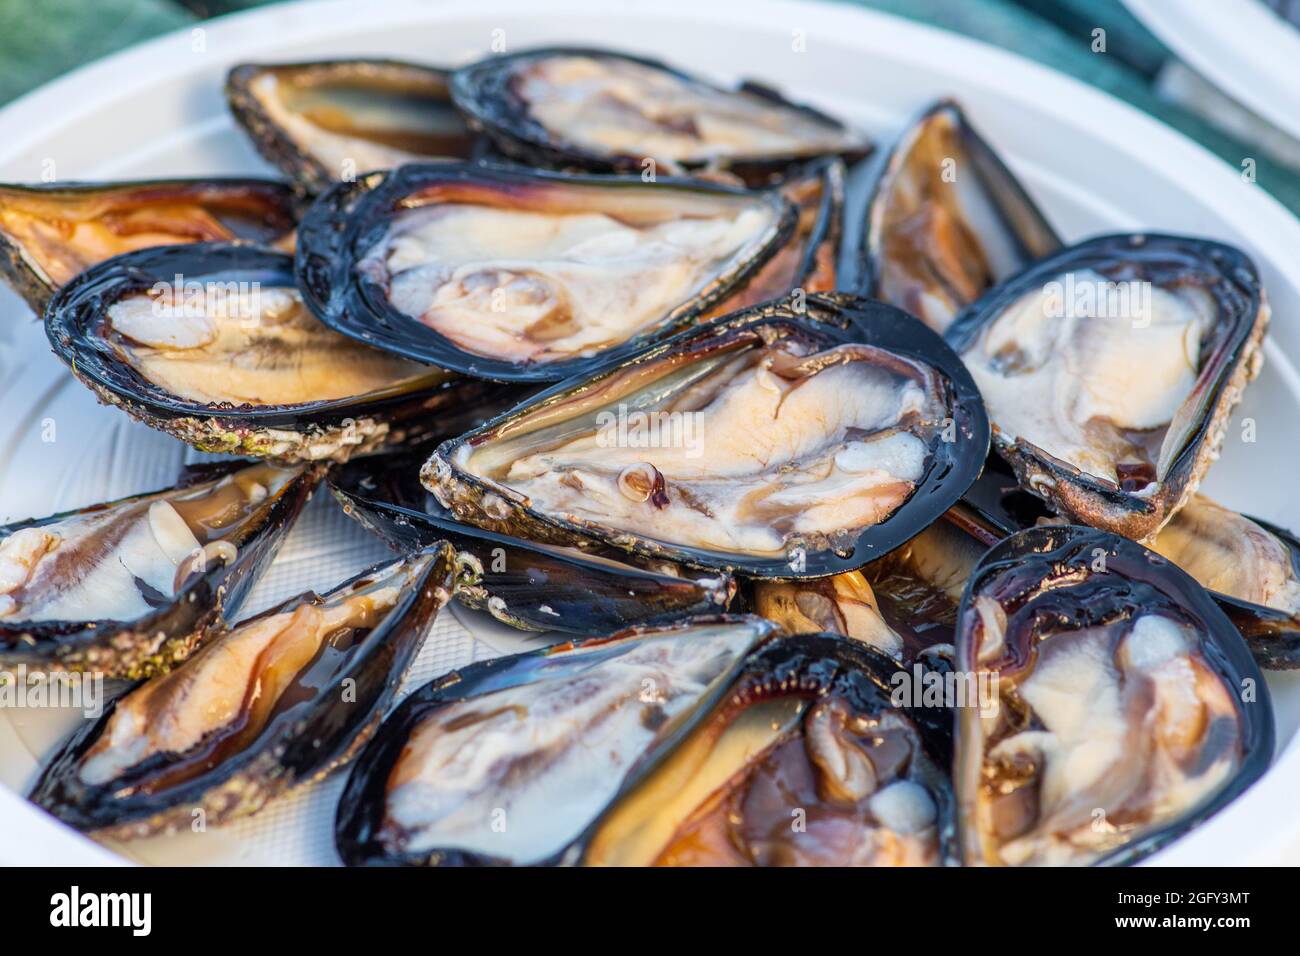 Opened by hand black raw mussels mollusk ready to eat in a plate in a fish market, sea fruits, sushi, close up Stock Photo